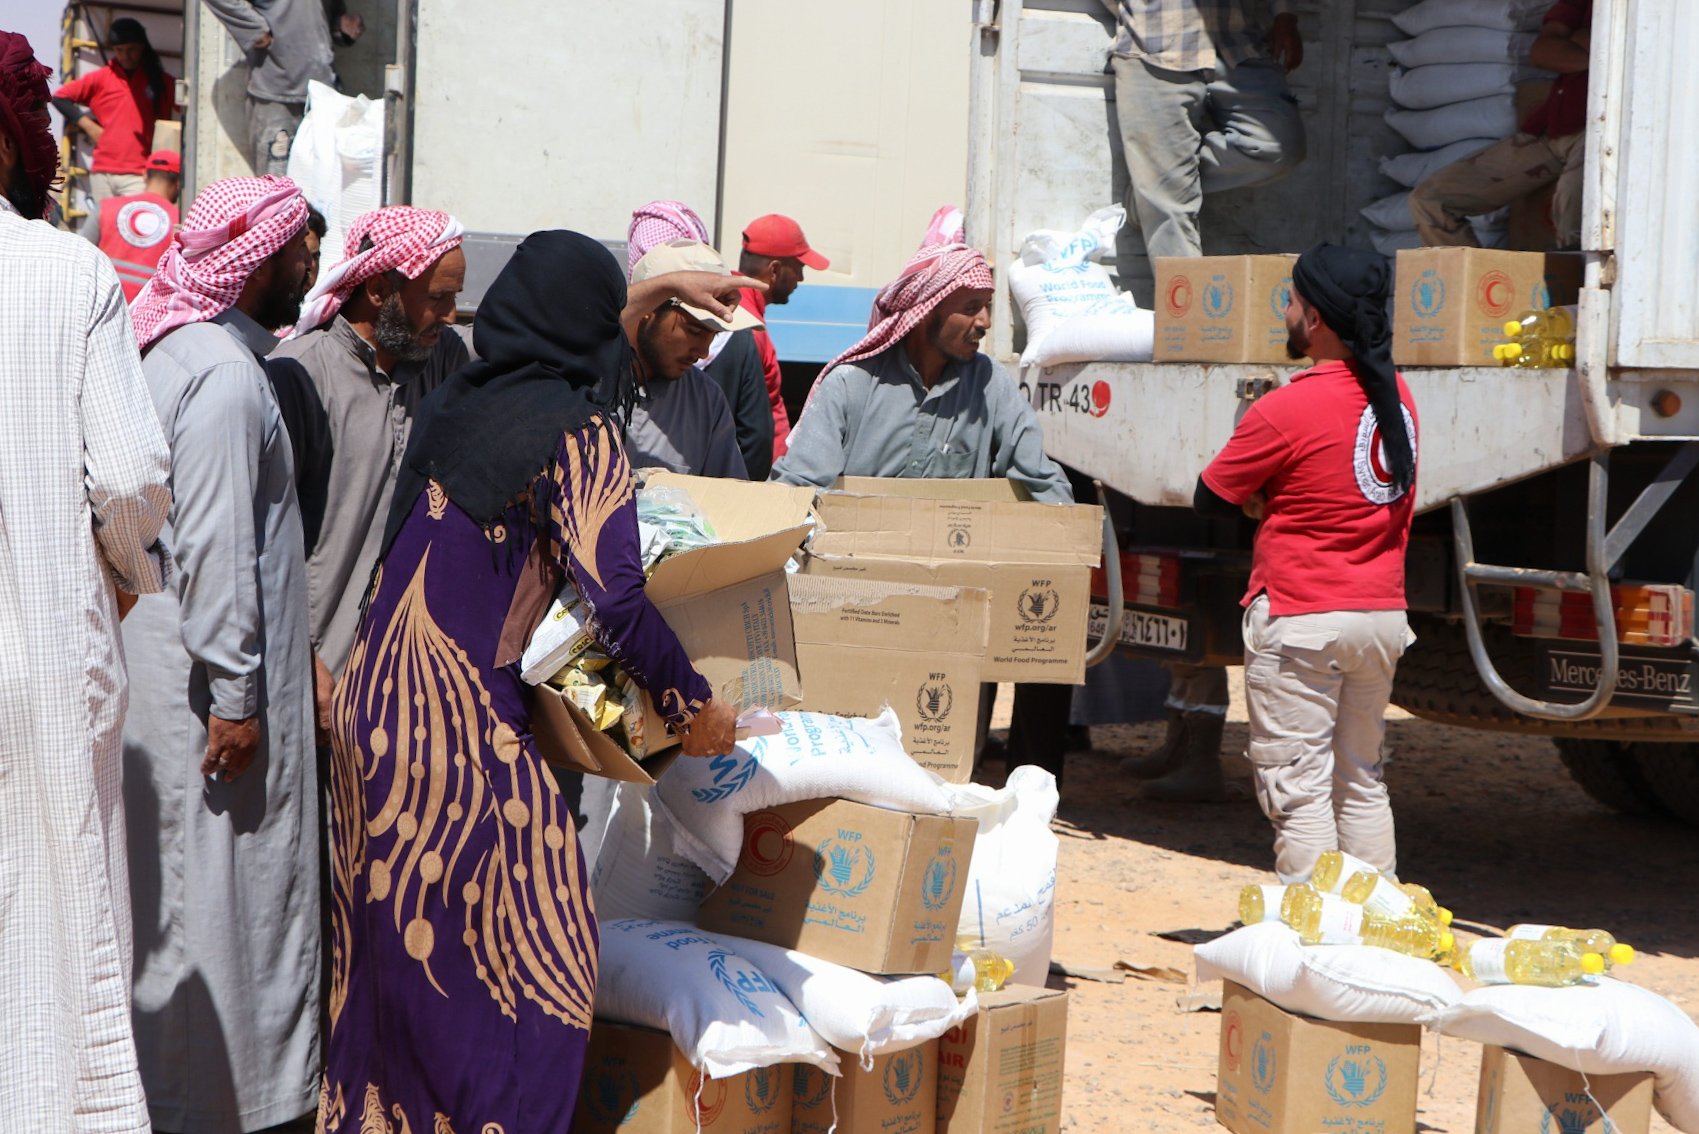 UN and SARC aid to Rukban